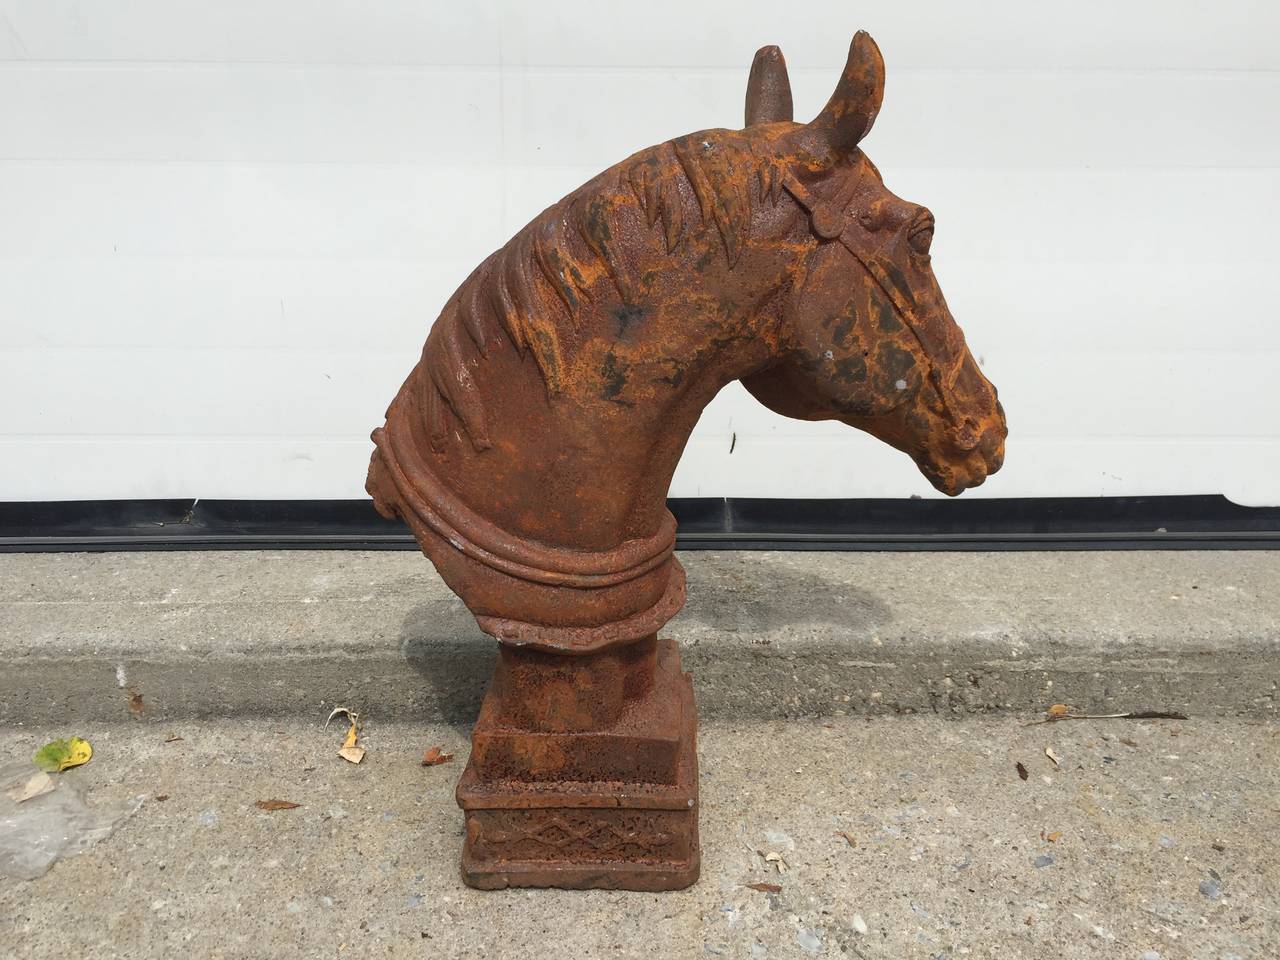 1980s Realism Cast Iron Sculpture of a Horse's Head and Nape im Zustand „Hervorragend“ im Angebot in Southampton, NY